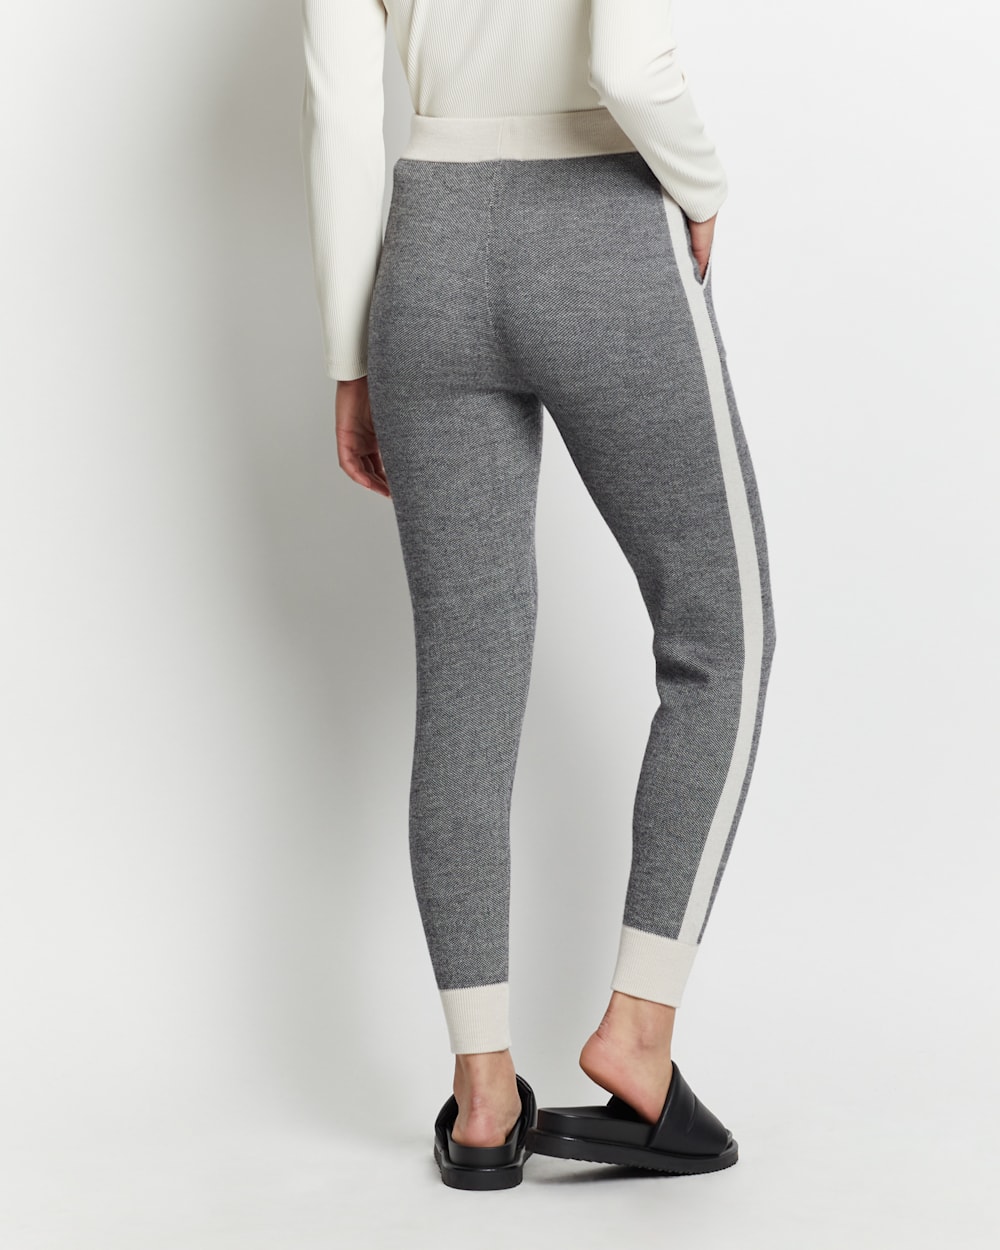 ALTERNATE VIEW OF WOMEN'S MERINO JOGGER PANTS IN CHARCOAL/IVORY image number 3